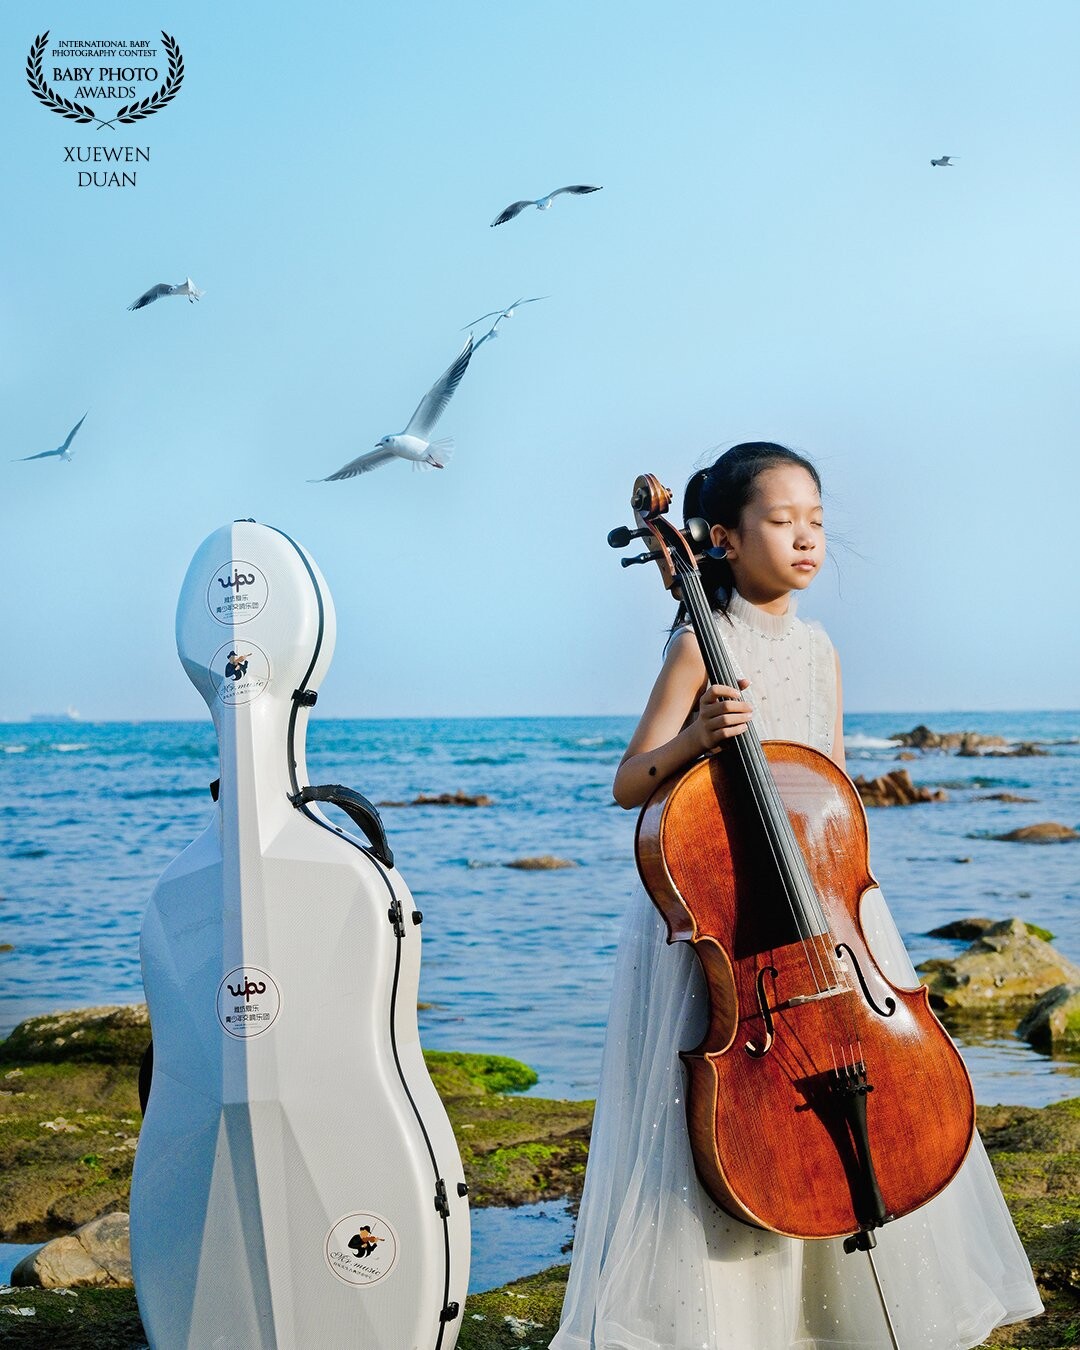 Go to see the sea in summer, let the sea breeze convey the gentle joy, you can leave everything to the sea without talking. There is a girl practicing cello in the scenery. Her name is Duoduo.